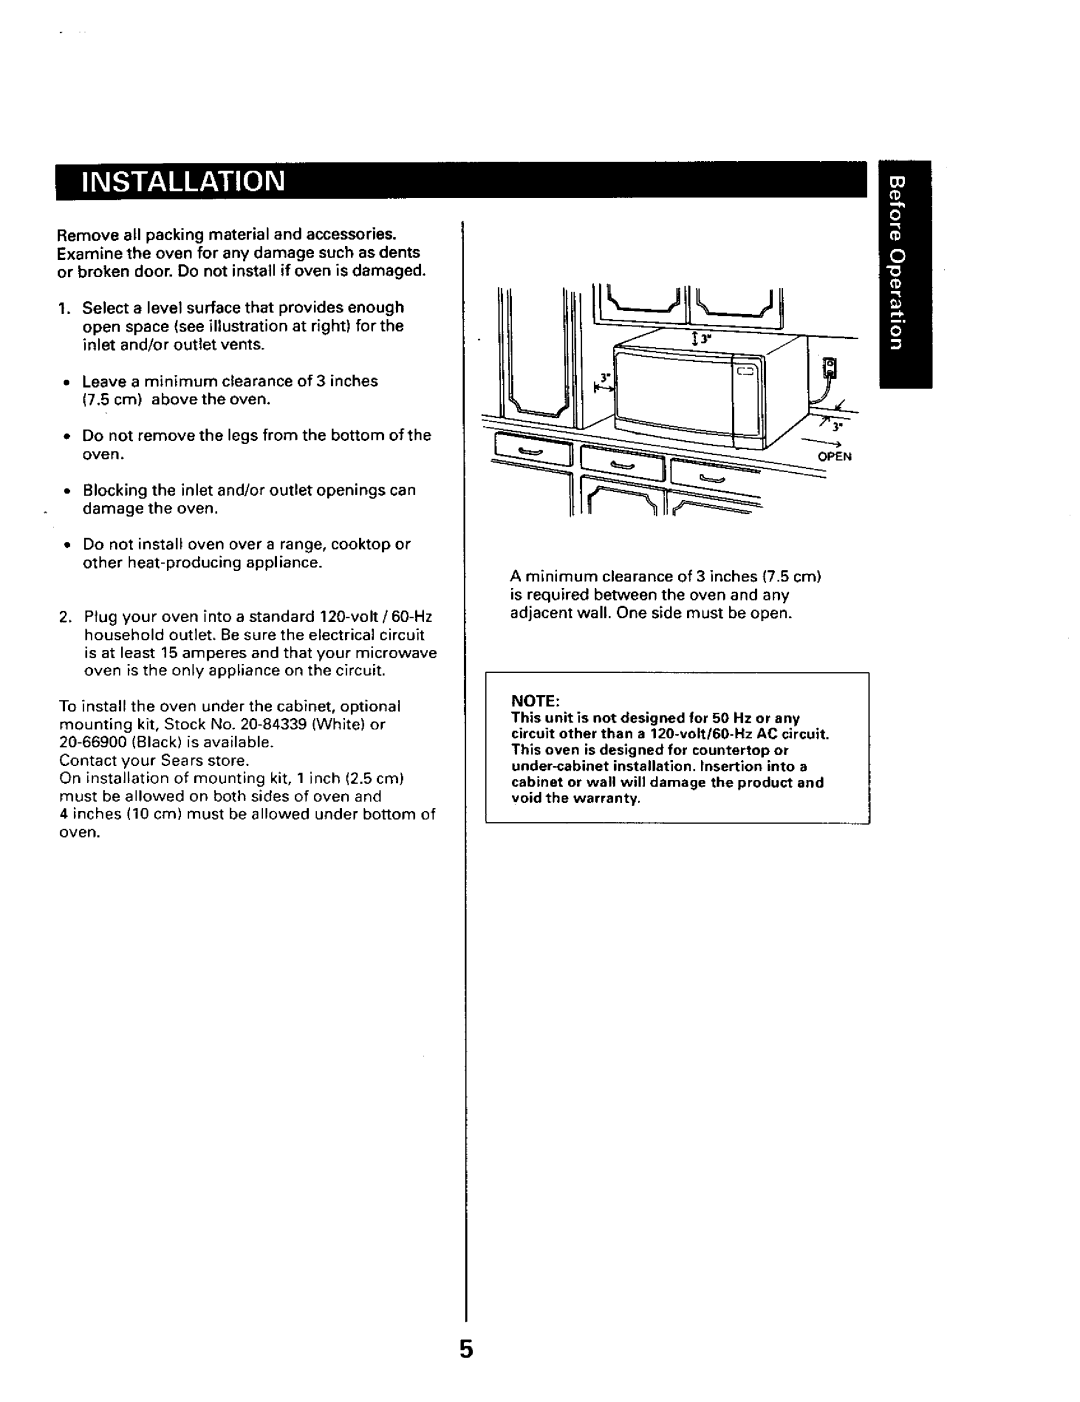 Sears 565.66101 owner manual Select a level surface that provides enough 